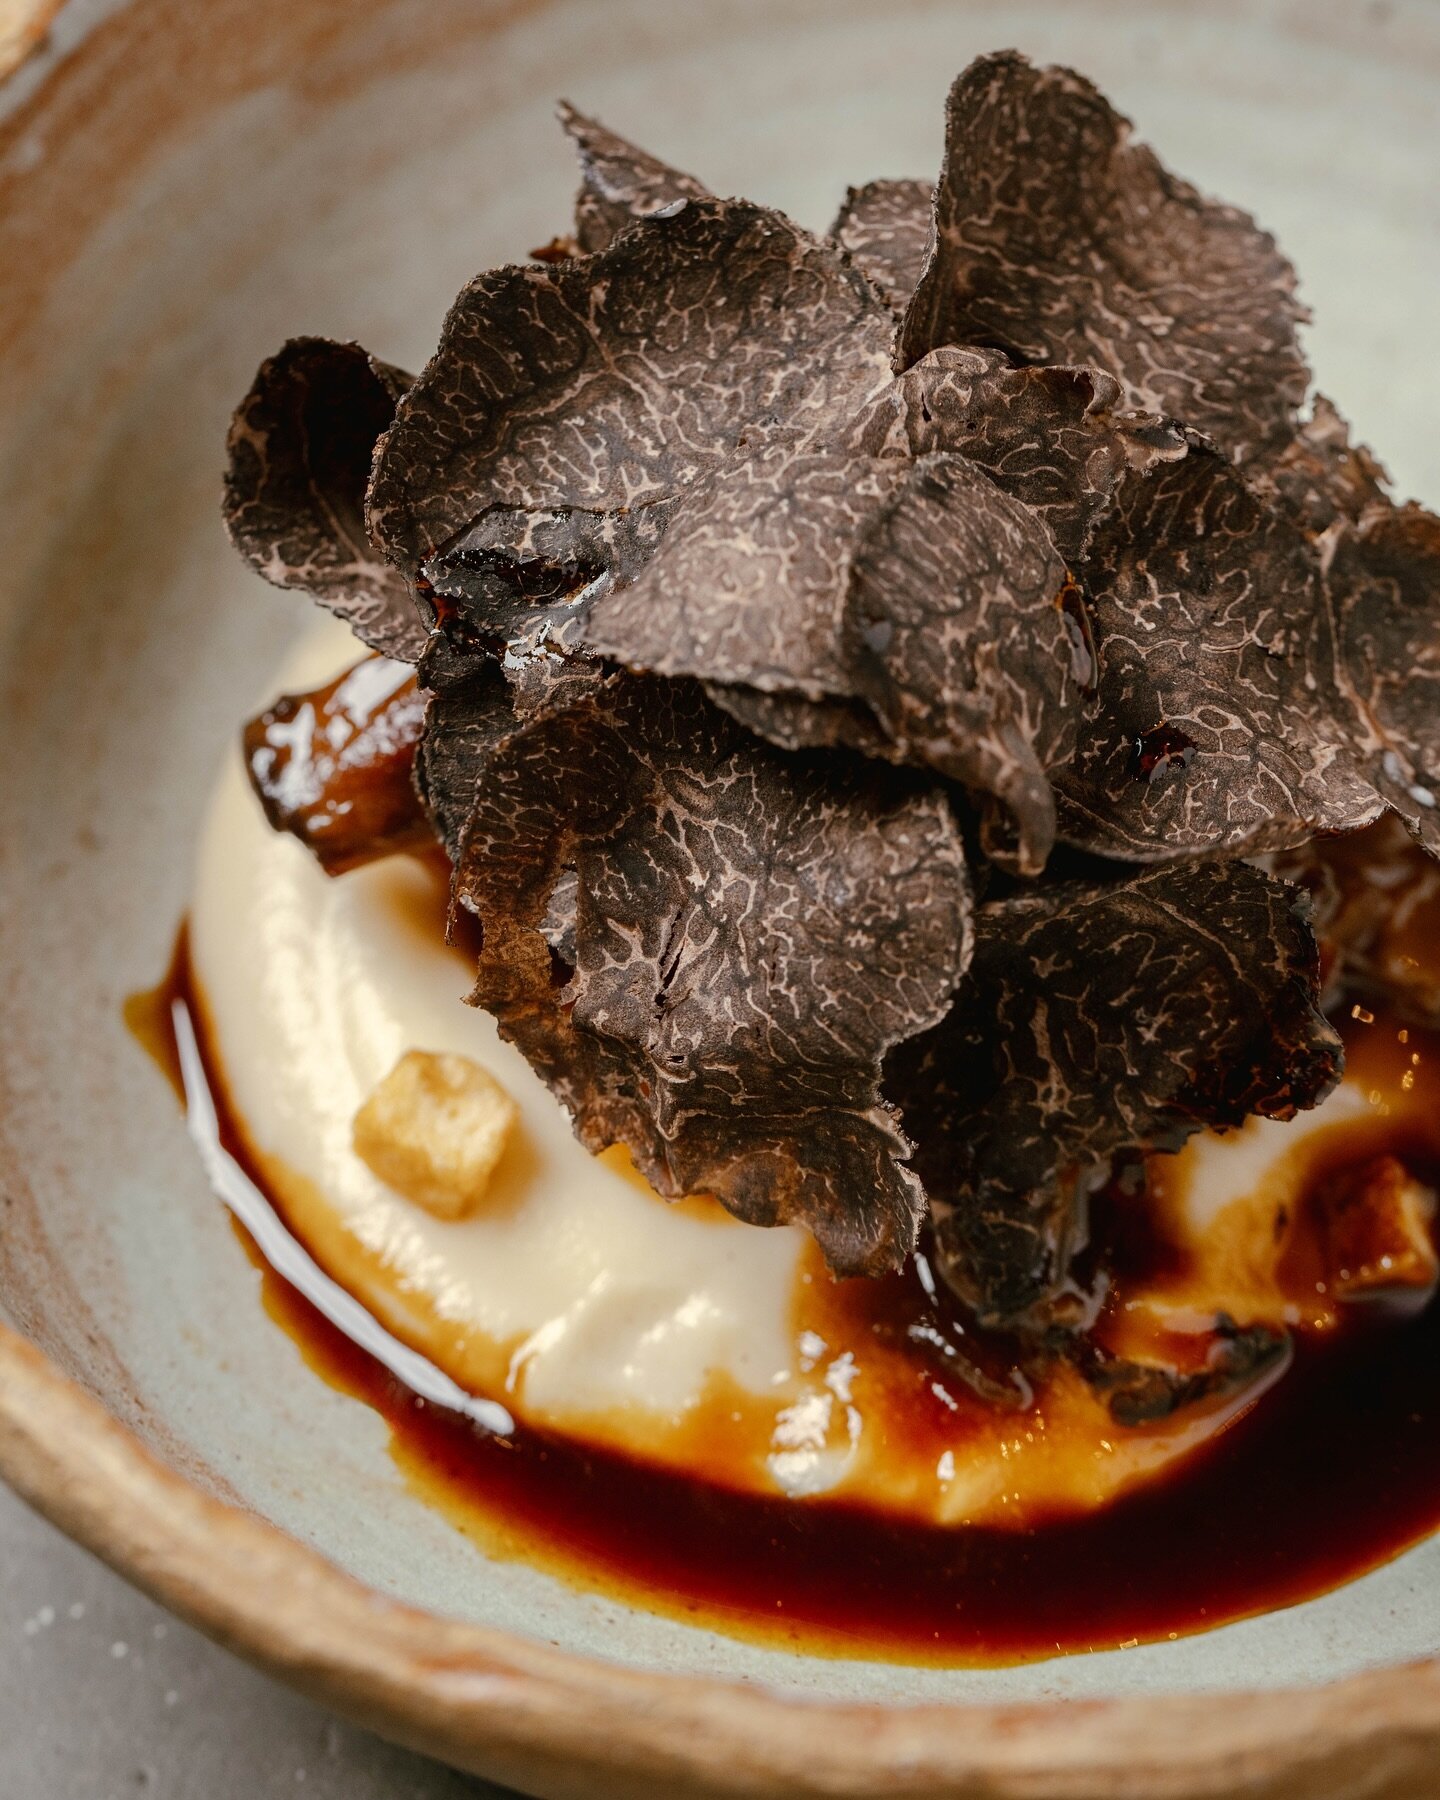 Catch the end of Truffle season at 22 Ships with our Rabo de Toro, a hearty oxtail stew made with a traditional recipe that evokes homely and comforting sensations. To elevate the dish, we add Spanish black truffles to infuse the dish with an earthy 